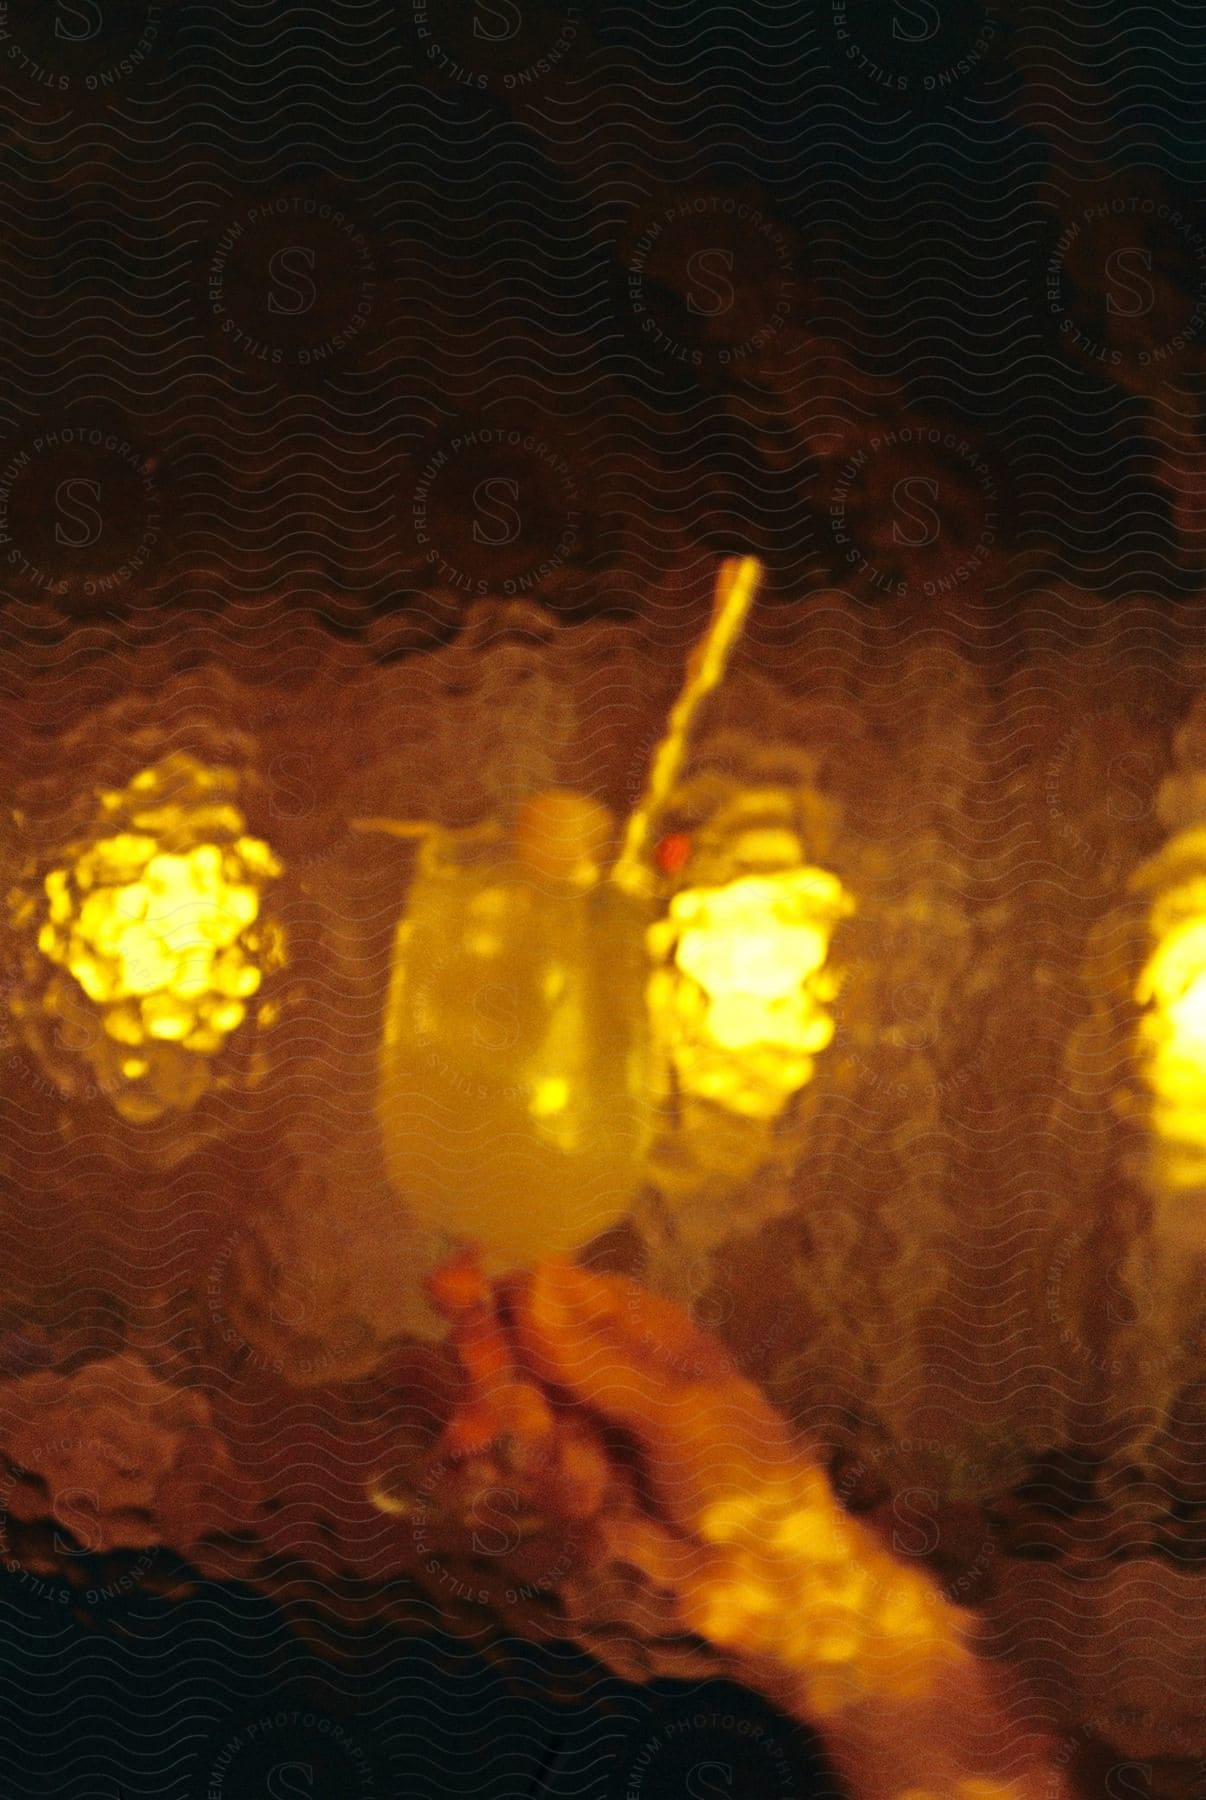 Hand holding a glass of a yellowish beverage with a straw and fruit garnish, reflected on a textured amber surface.